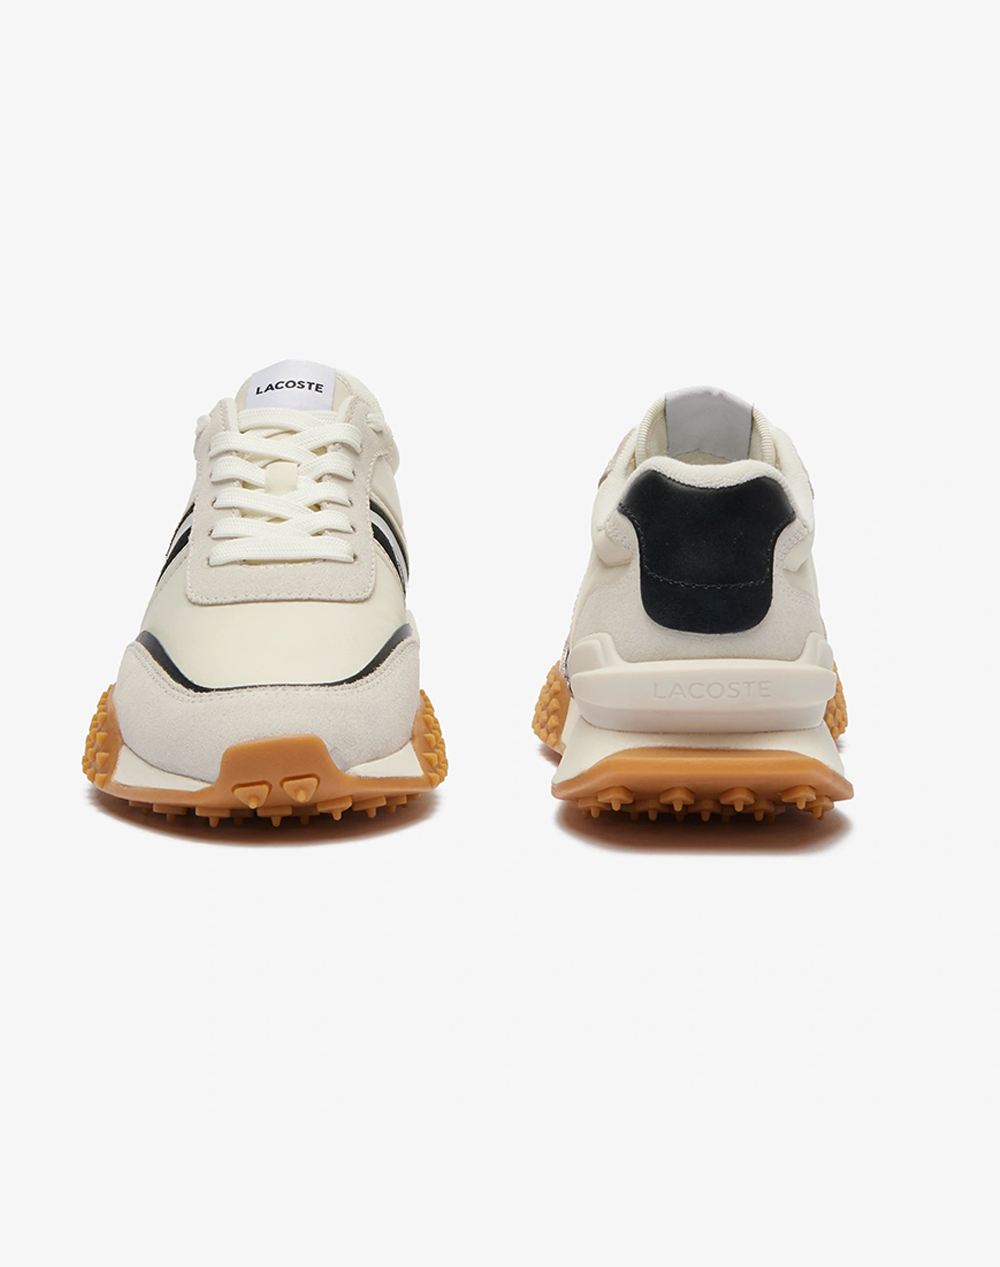 LACOSTE WOMENS SHOES L-SPIN DELUXE 124 4 SFA L-SPIN DELUXE 124 4 SFA